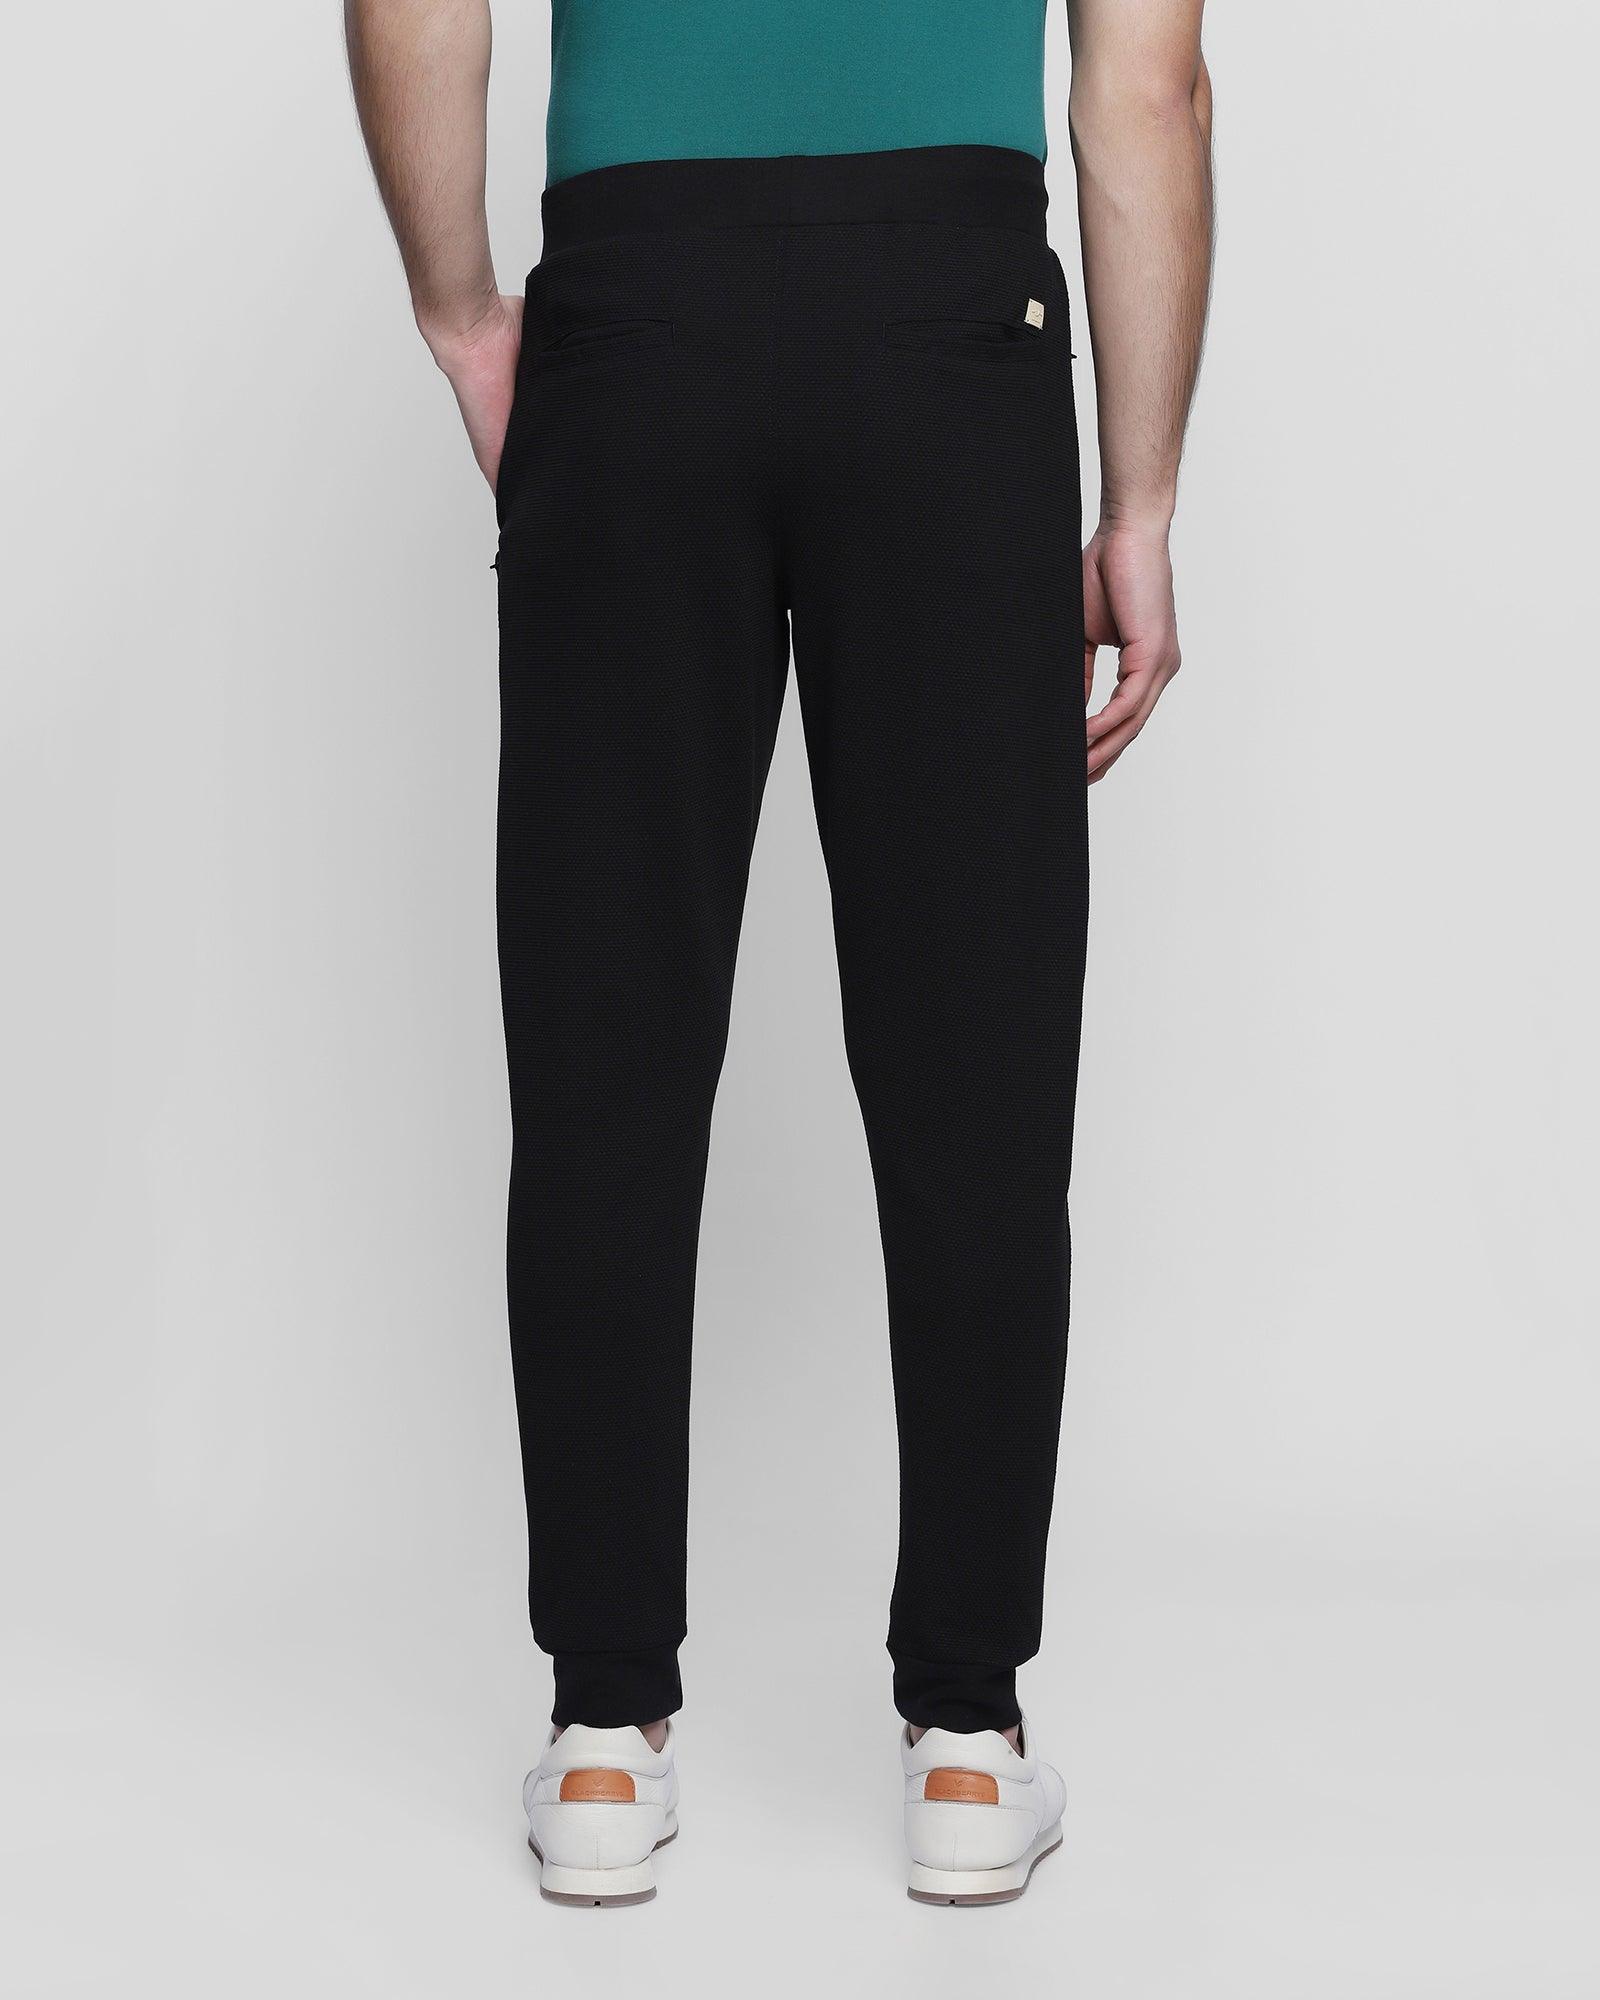 Buy Men's Joggers Online at The EQVAL Store